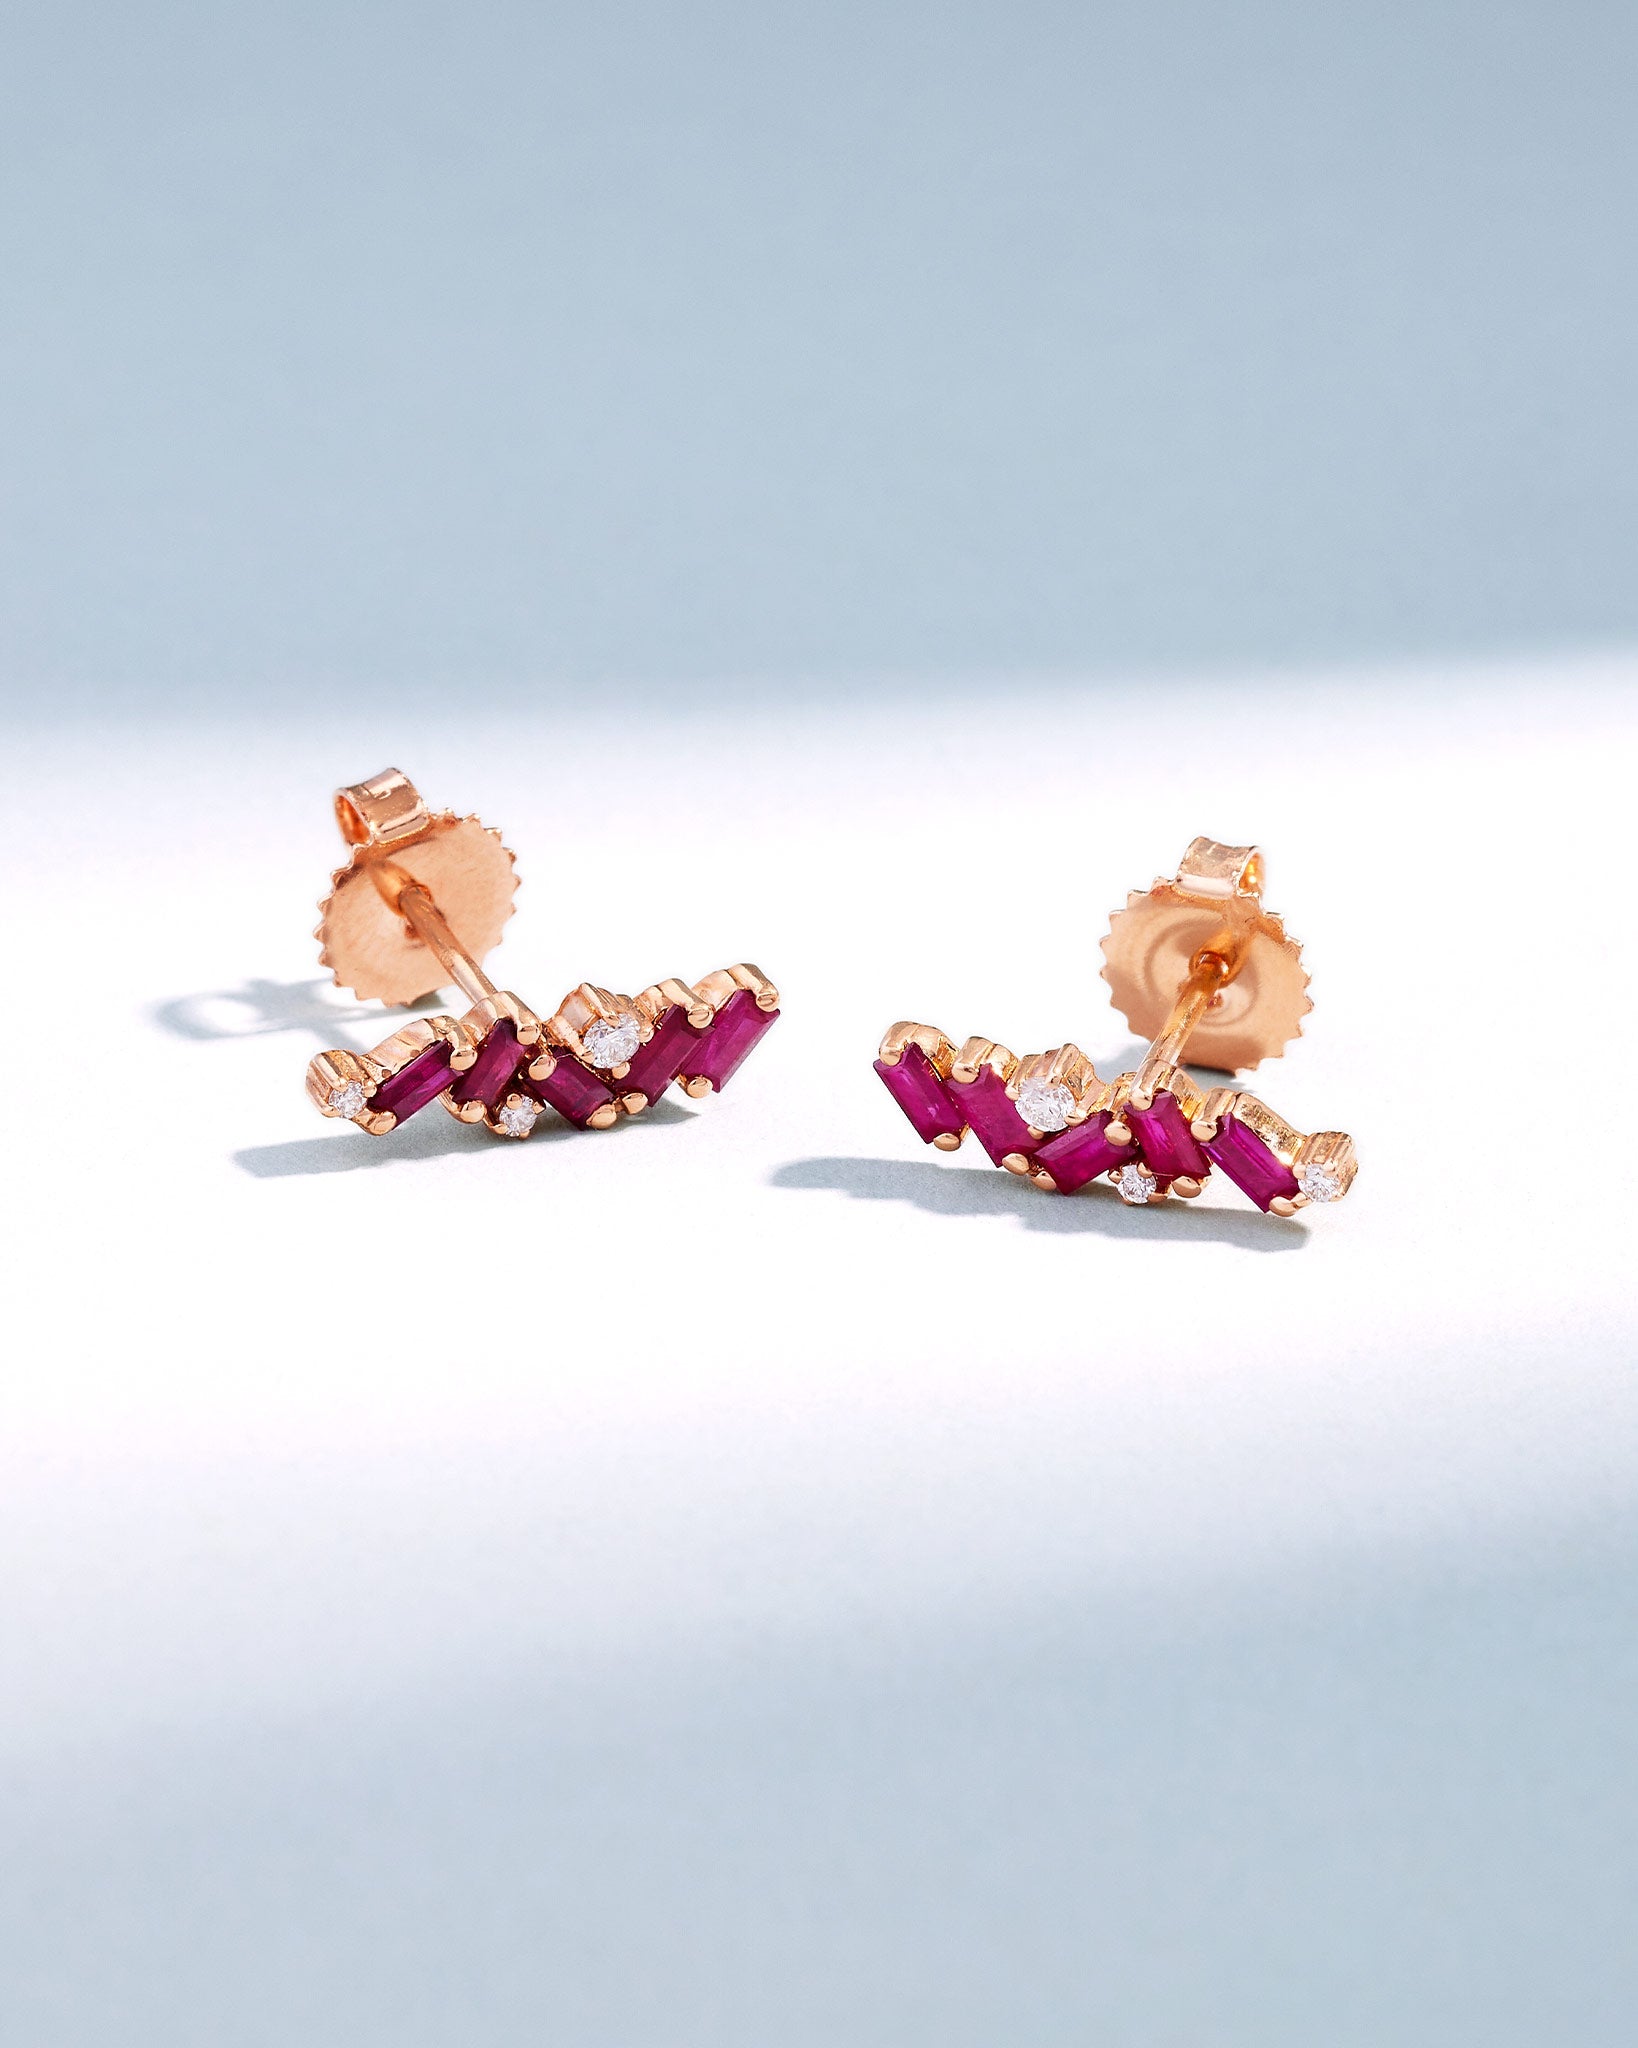 Suzanne Kalan Frenzy Ruby Studs in 18k rose gold